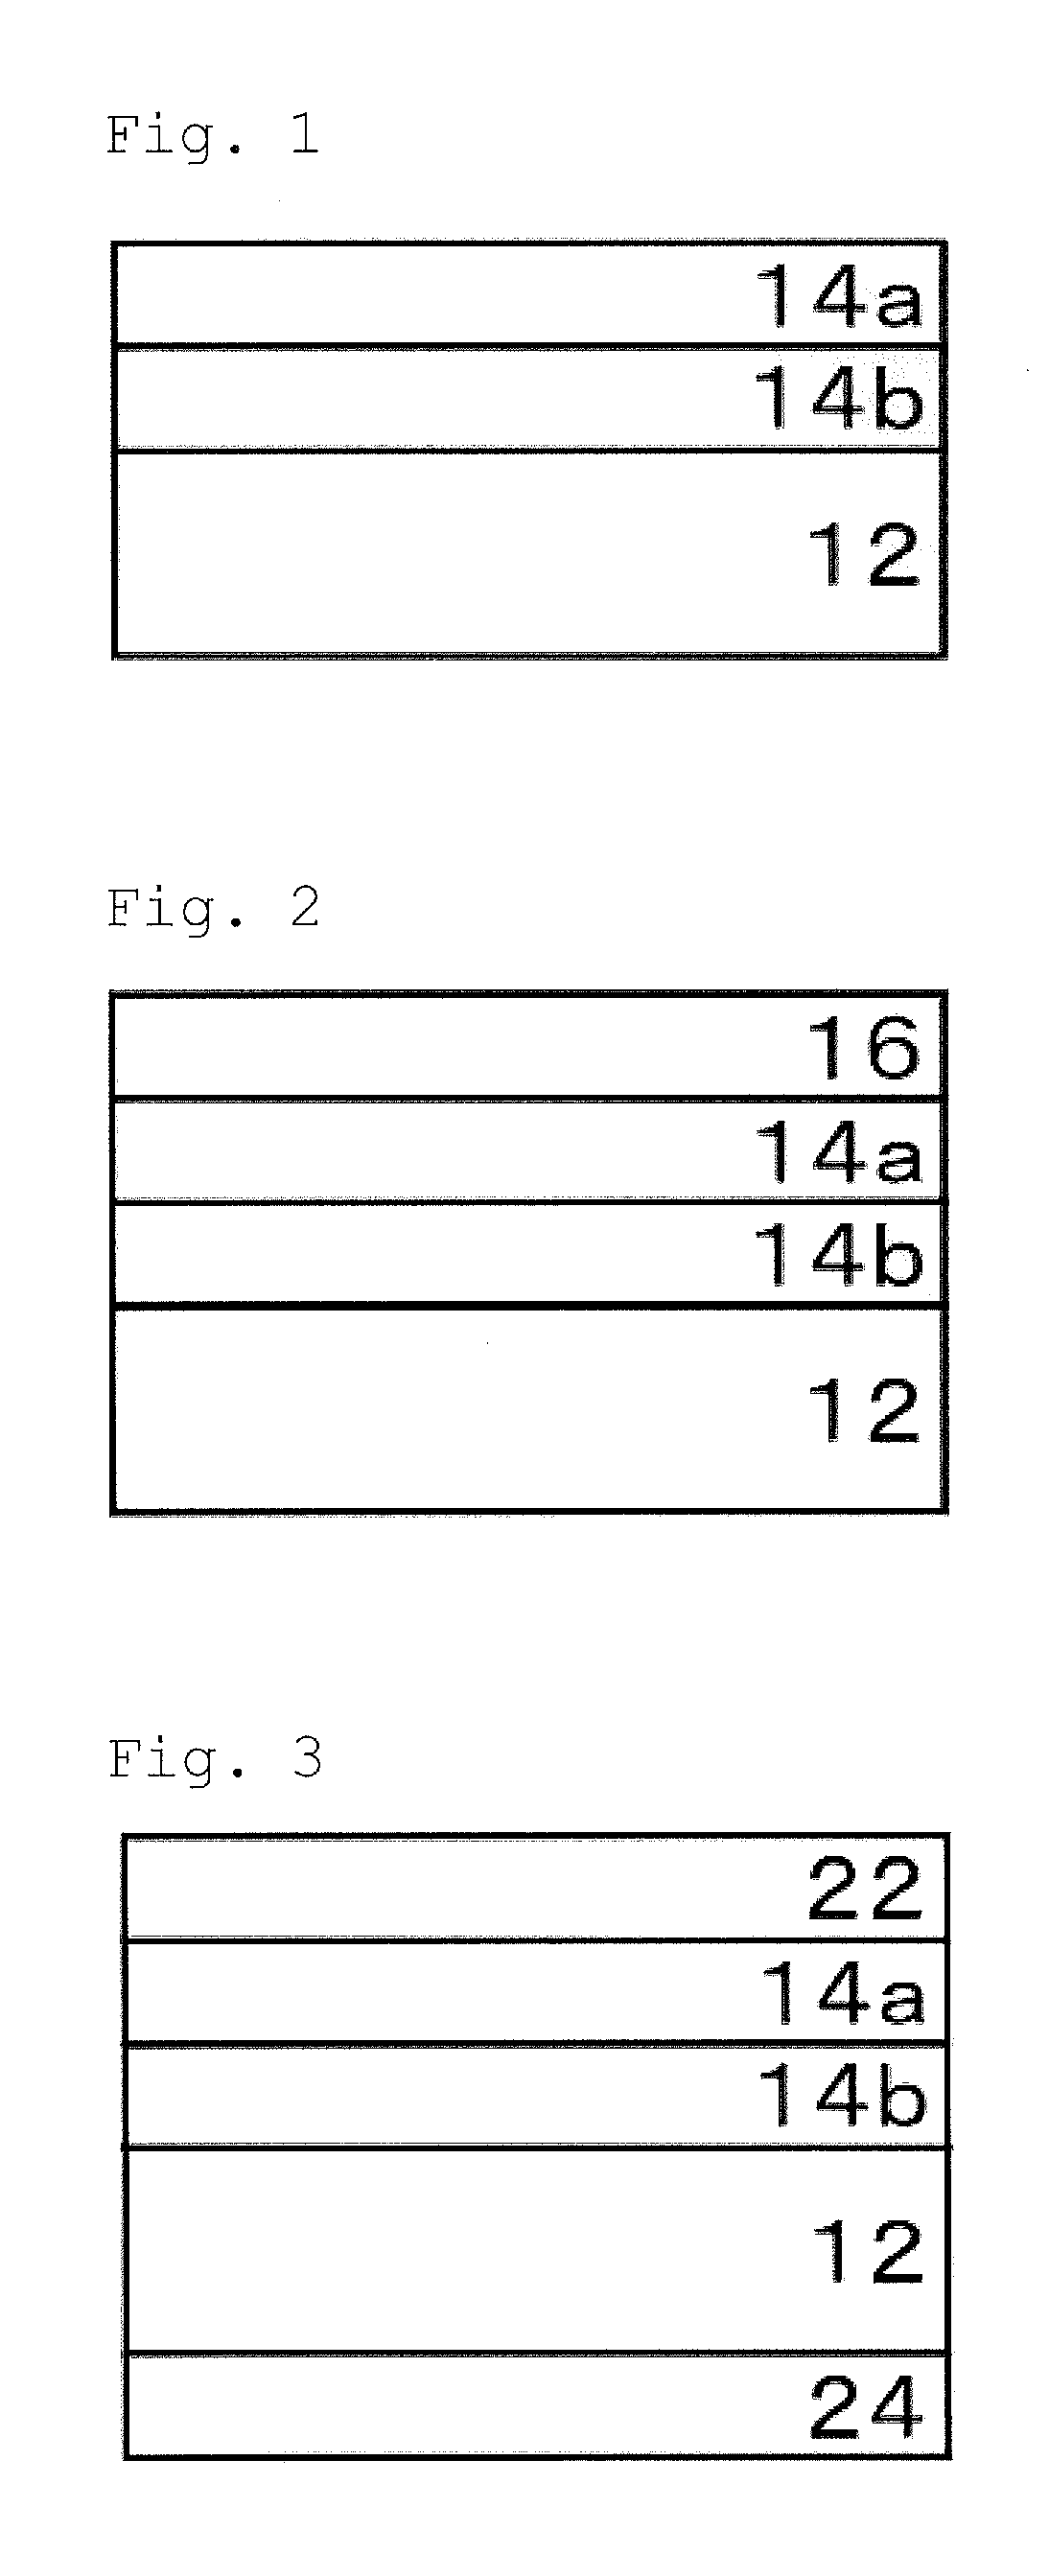 Light reflection layer, light reflection plate, laminated interlayer film sheet for laminated glass, laminated glass, and method of manufacturing these